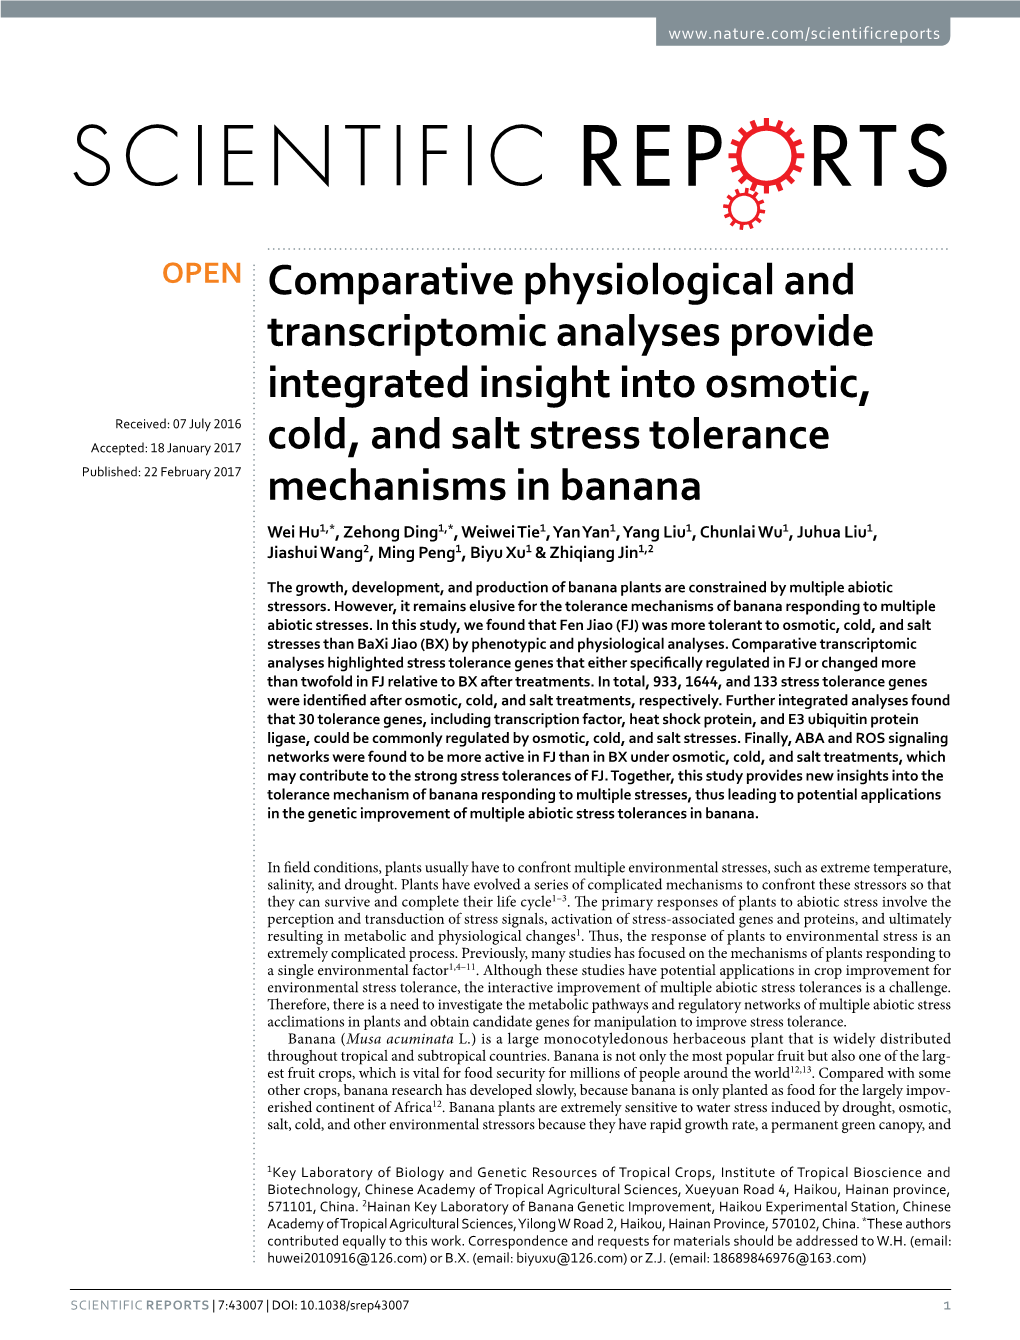 Comparative Physiological and Transcriptomic Analyses Provide